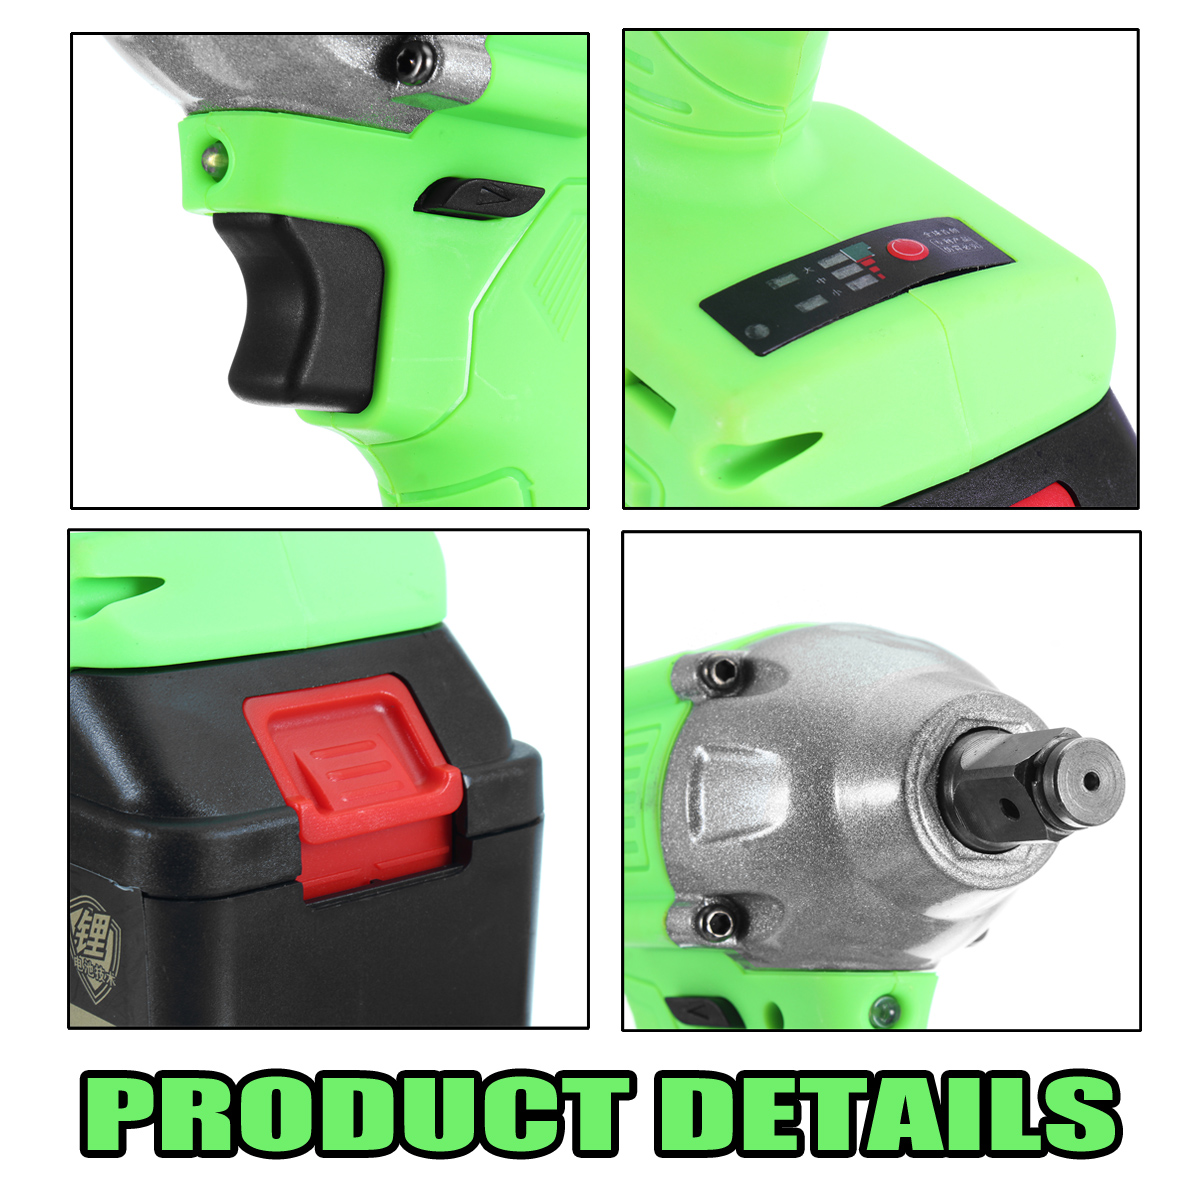 98V-9000mAh-Cordless-Lithium-Ion-Electric-Impact-Wrench-Power-Wrenche-Brushless-Motor-1270466-4